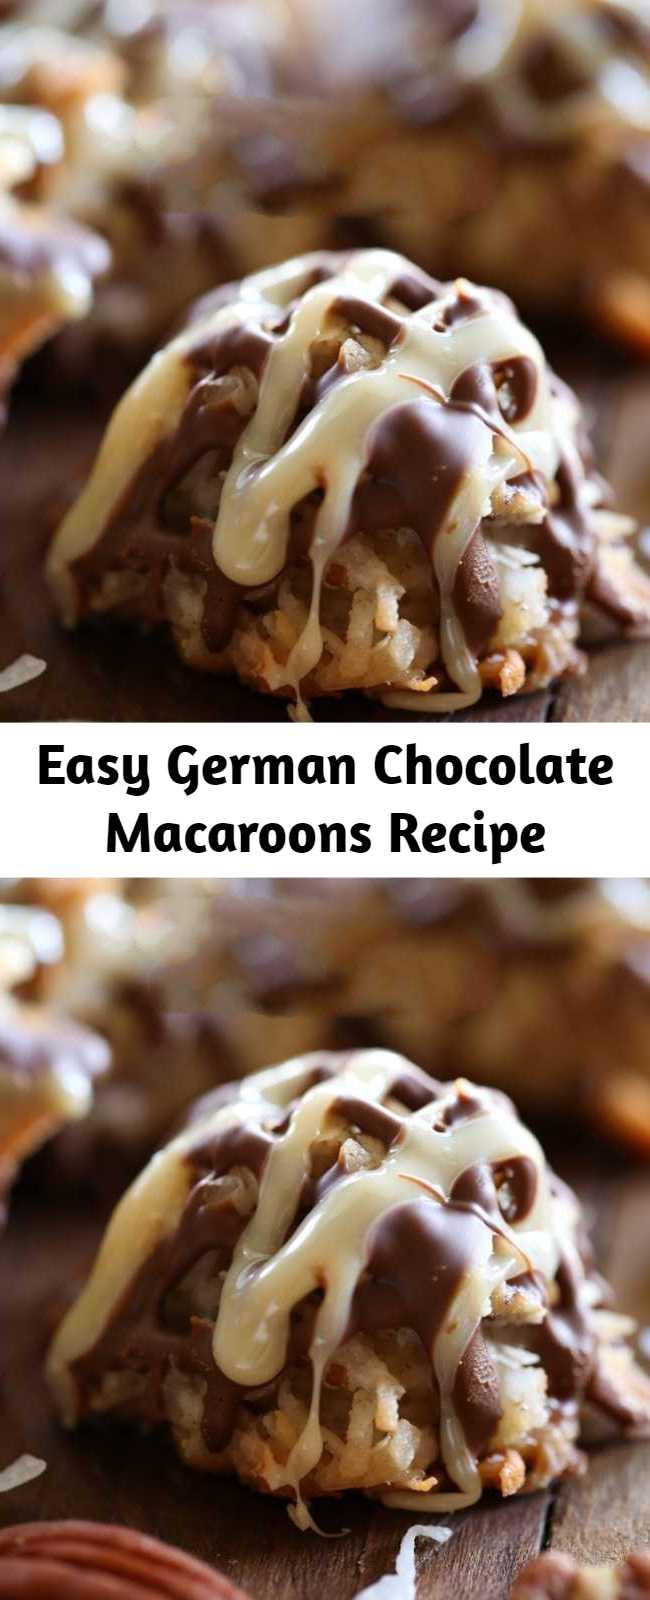 Easy German Chocolate Macaroons Recipe - These cookies are SO delicious! If you love german chocolate, then you are going to go crazy over these!